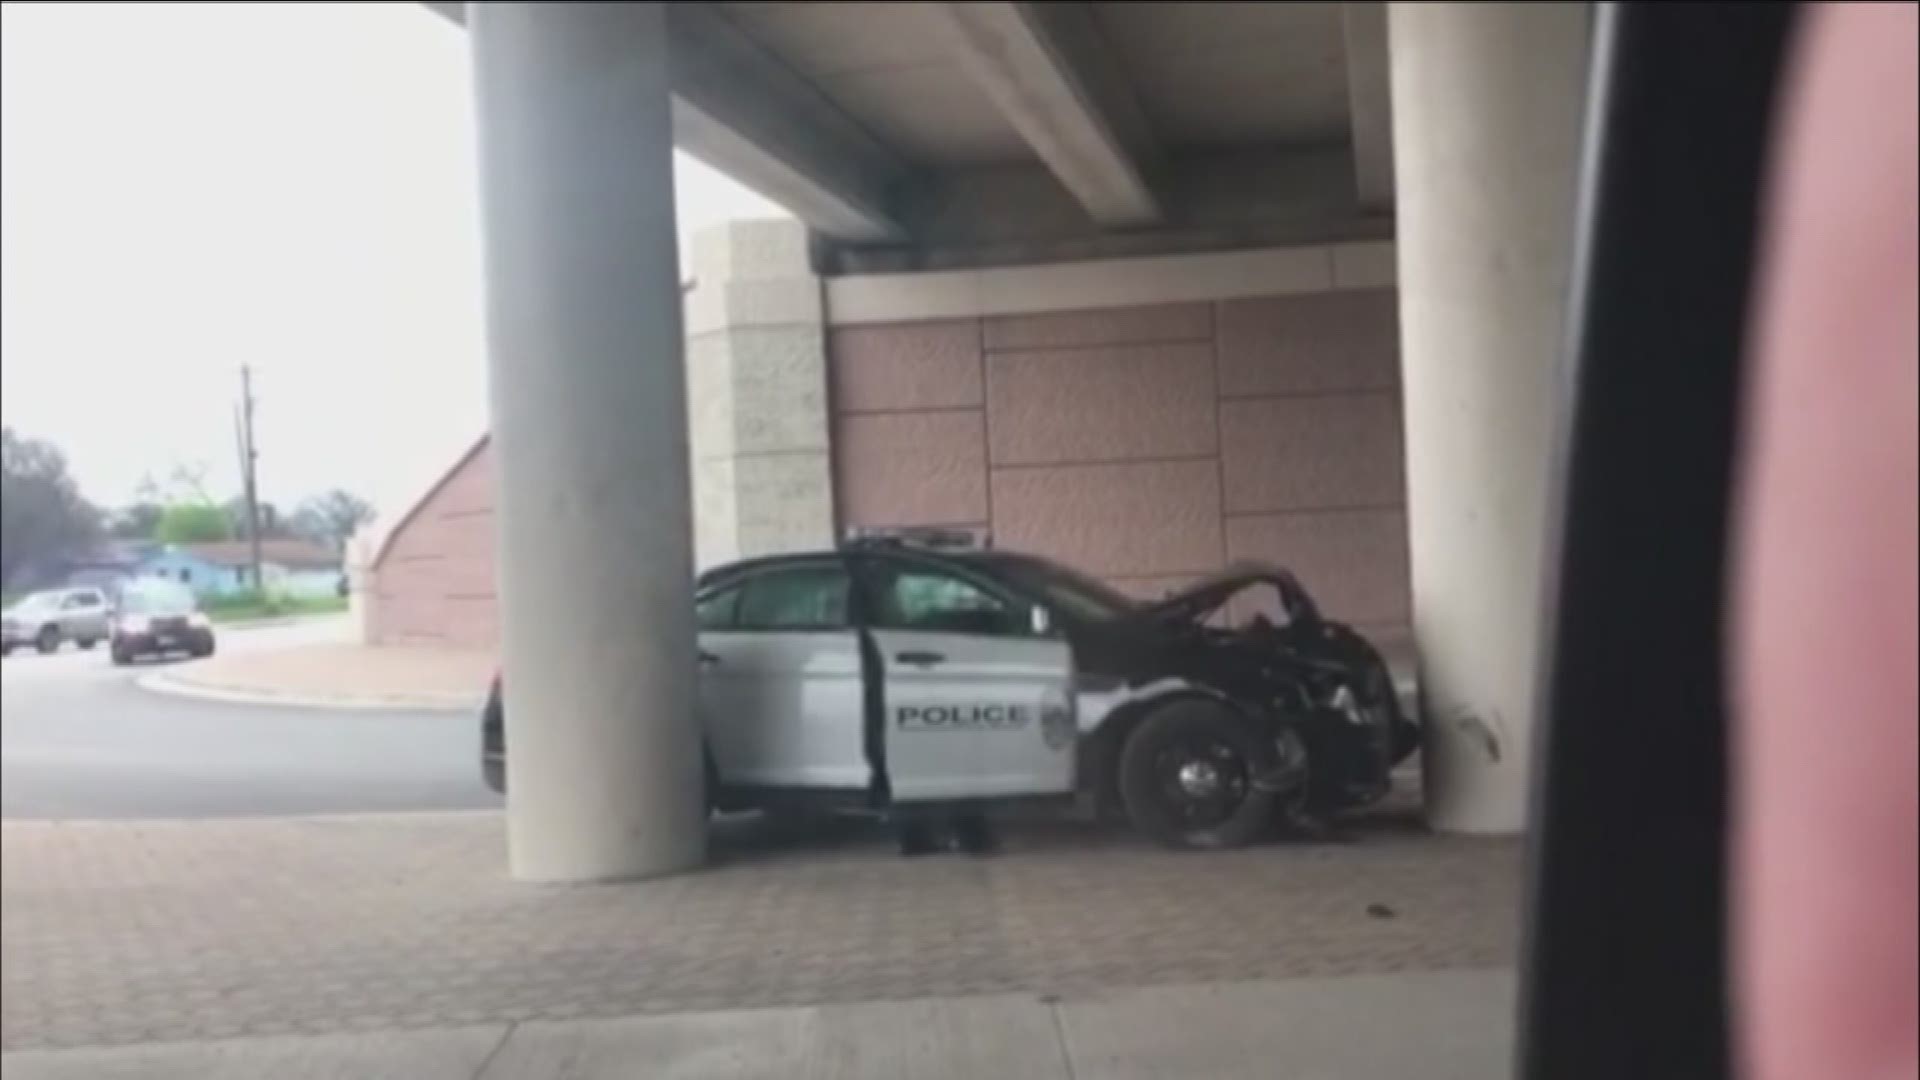 An Austin police officer is recovering after crashing a patrol vehicle below the Highway 71 overpass on FM 973 in southeast Austin.